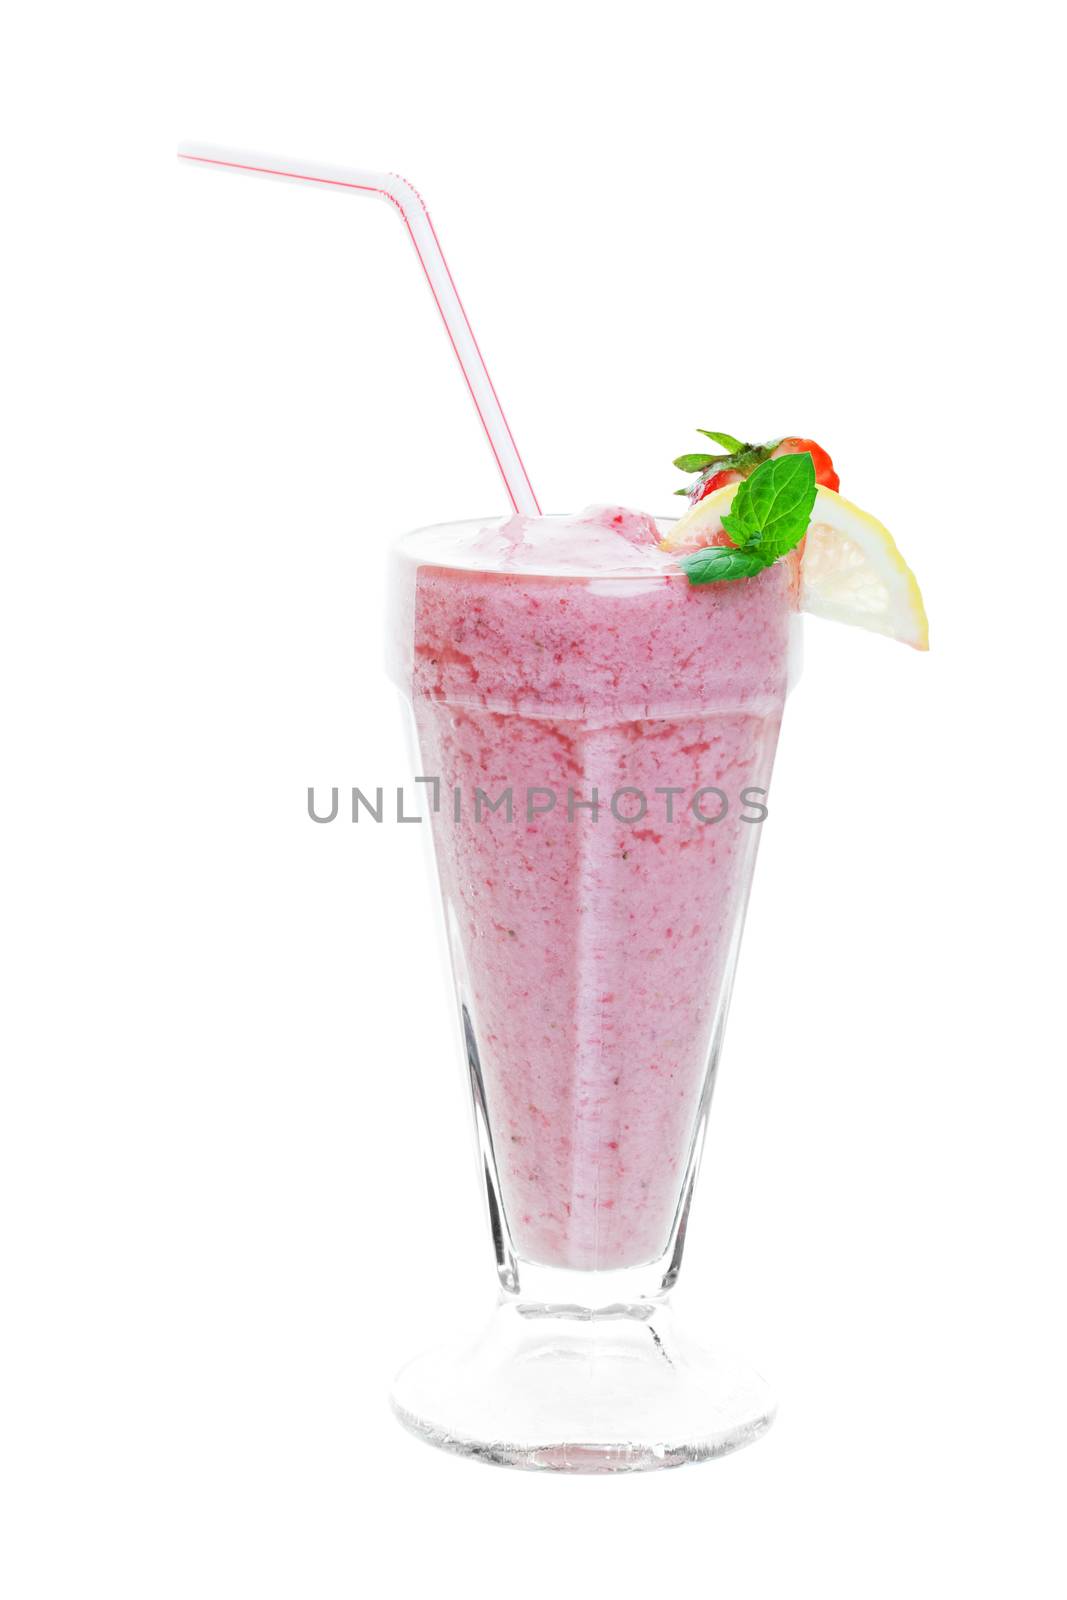 A strawberry smoothie shake studio isolated on a white background.
